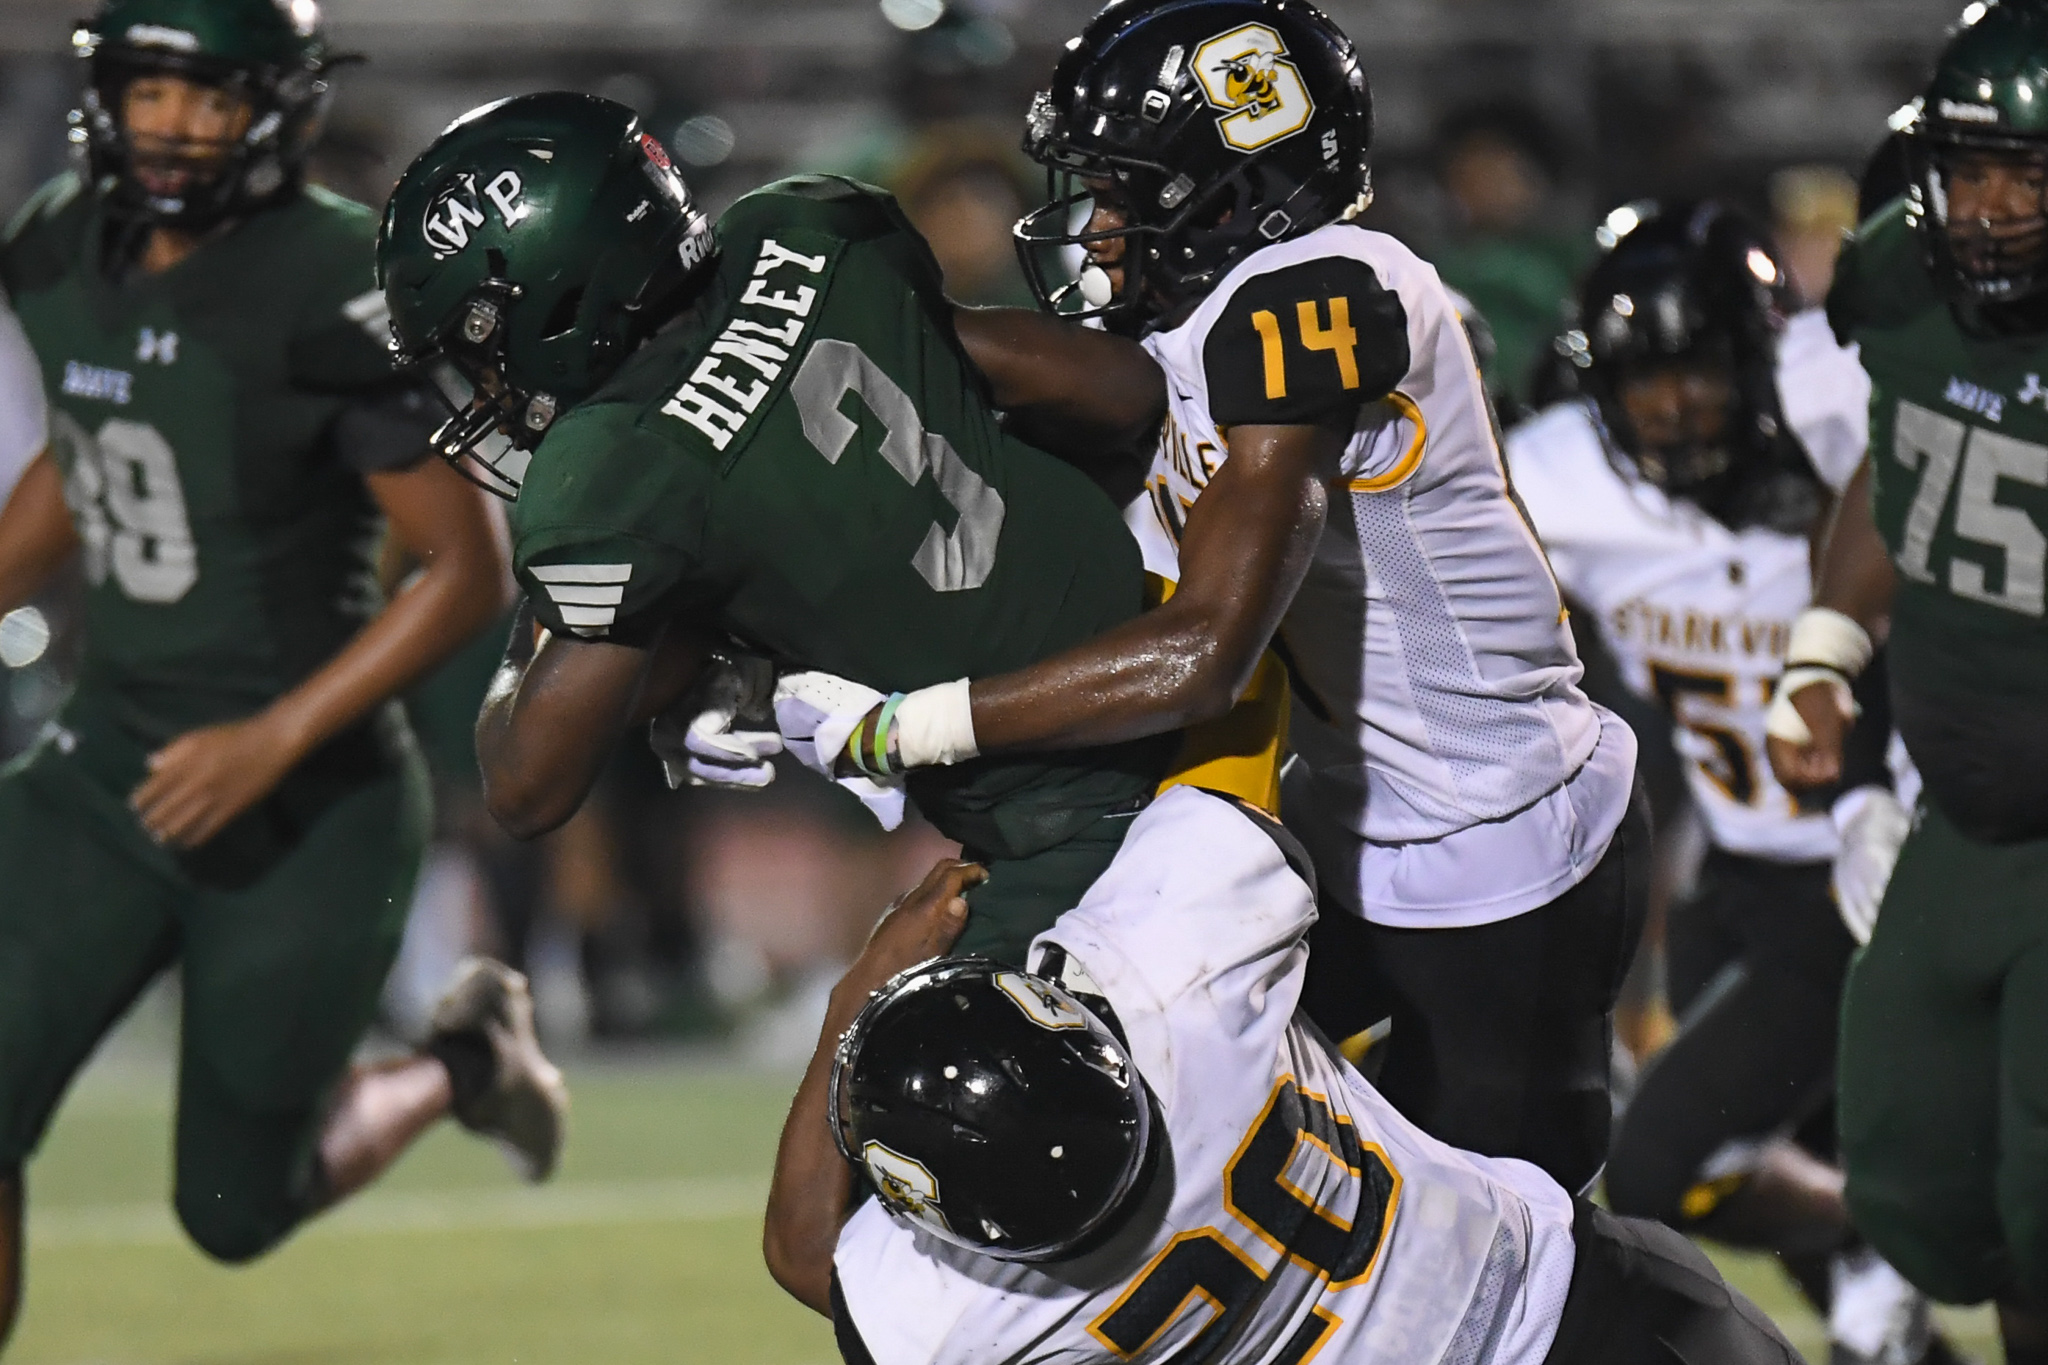 Starkville dominates West Point in home opener The Dispatch